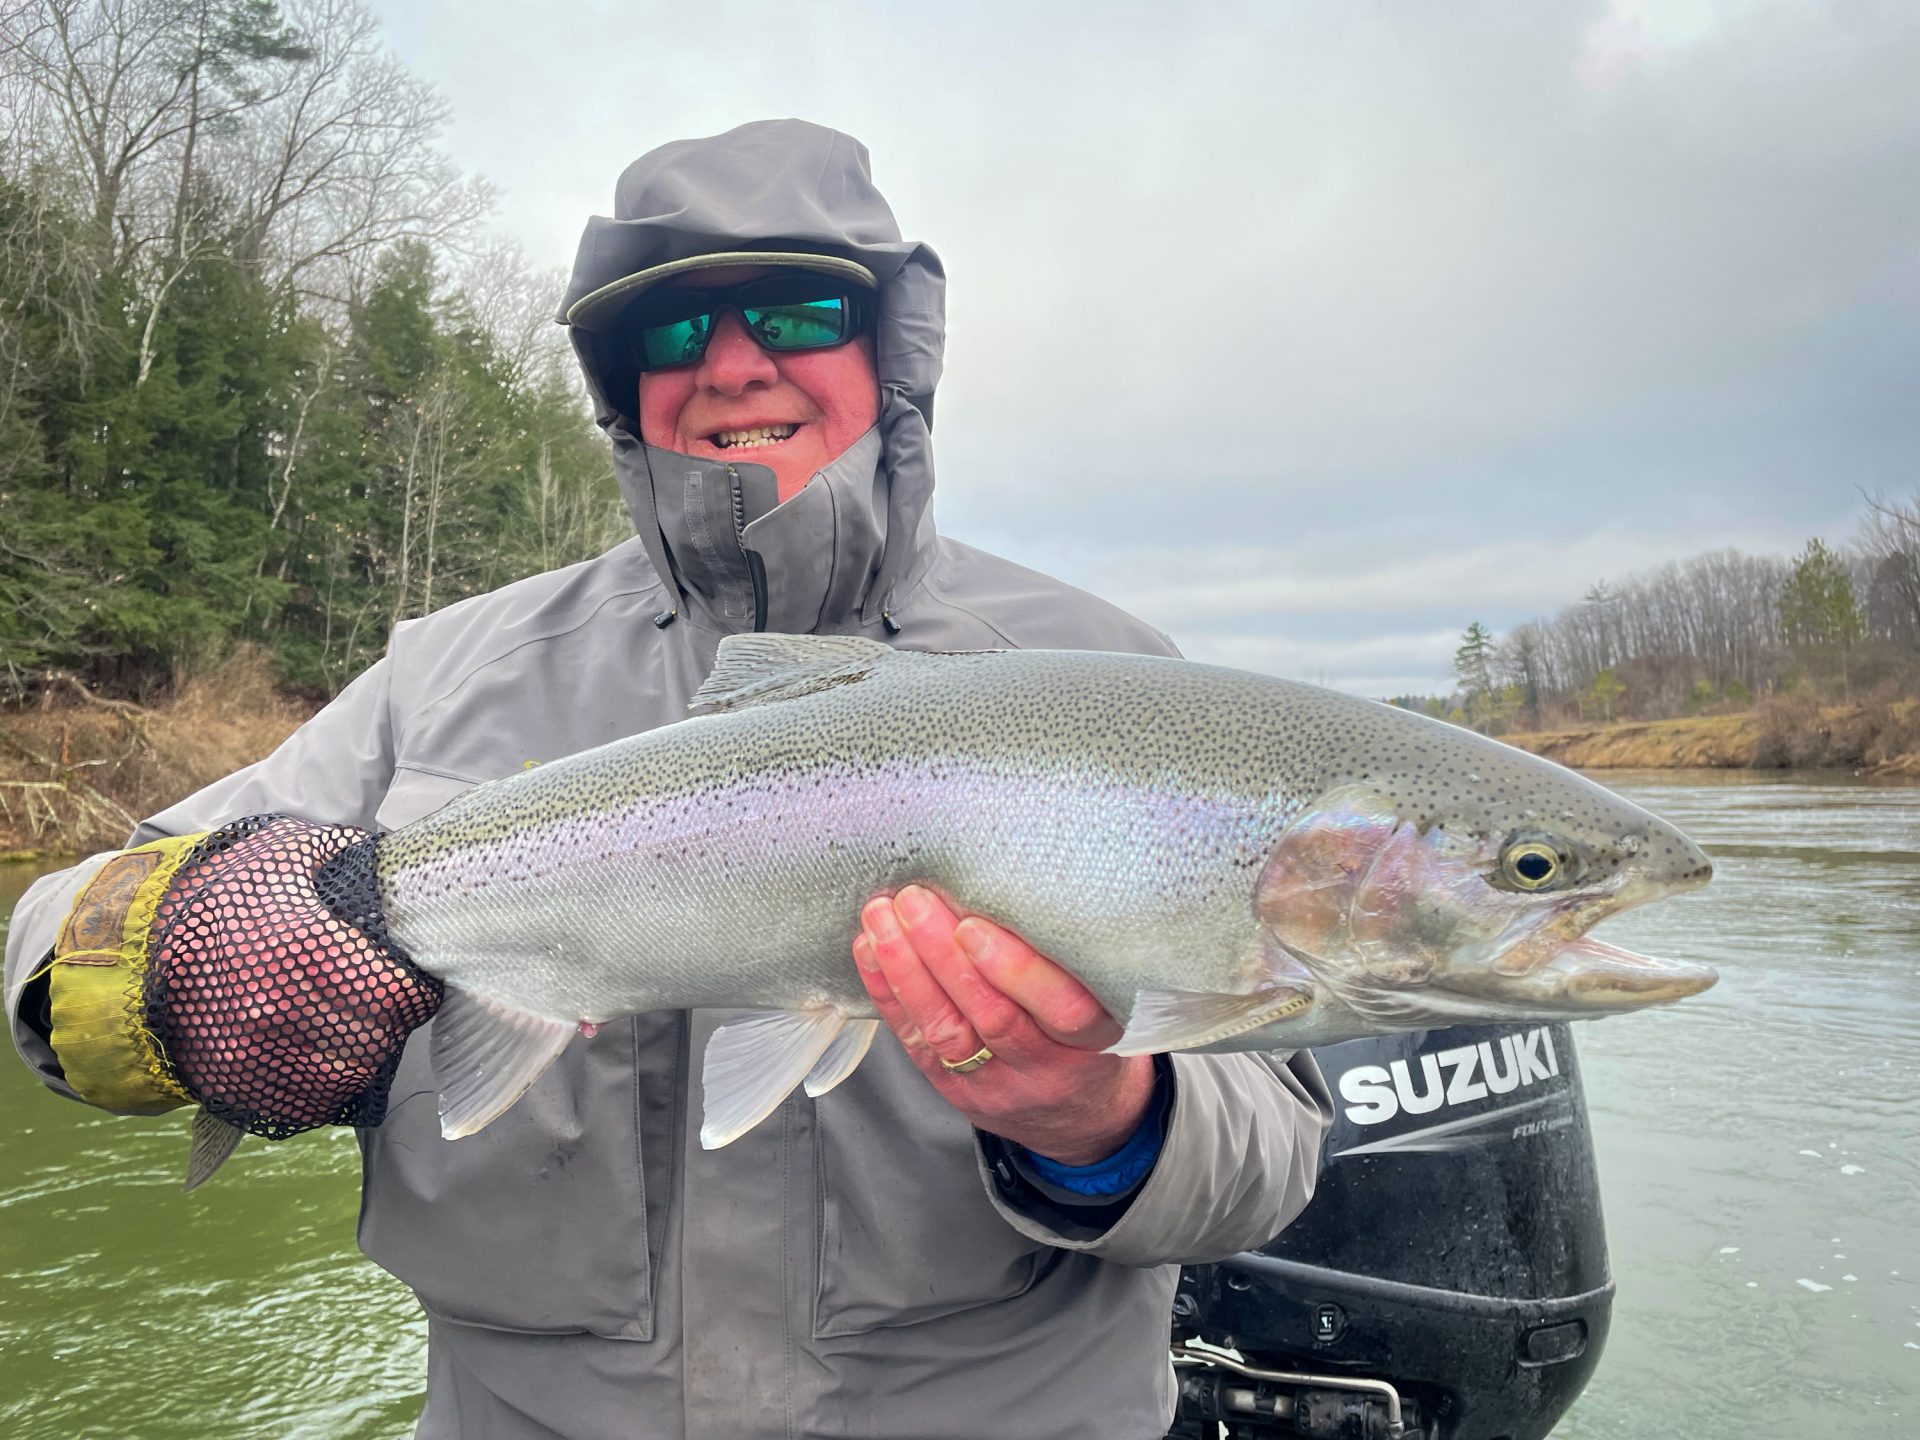 Manistee River below Tippy Dam - Fishing Report - Guide Service